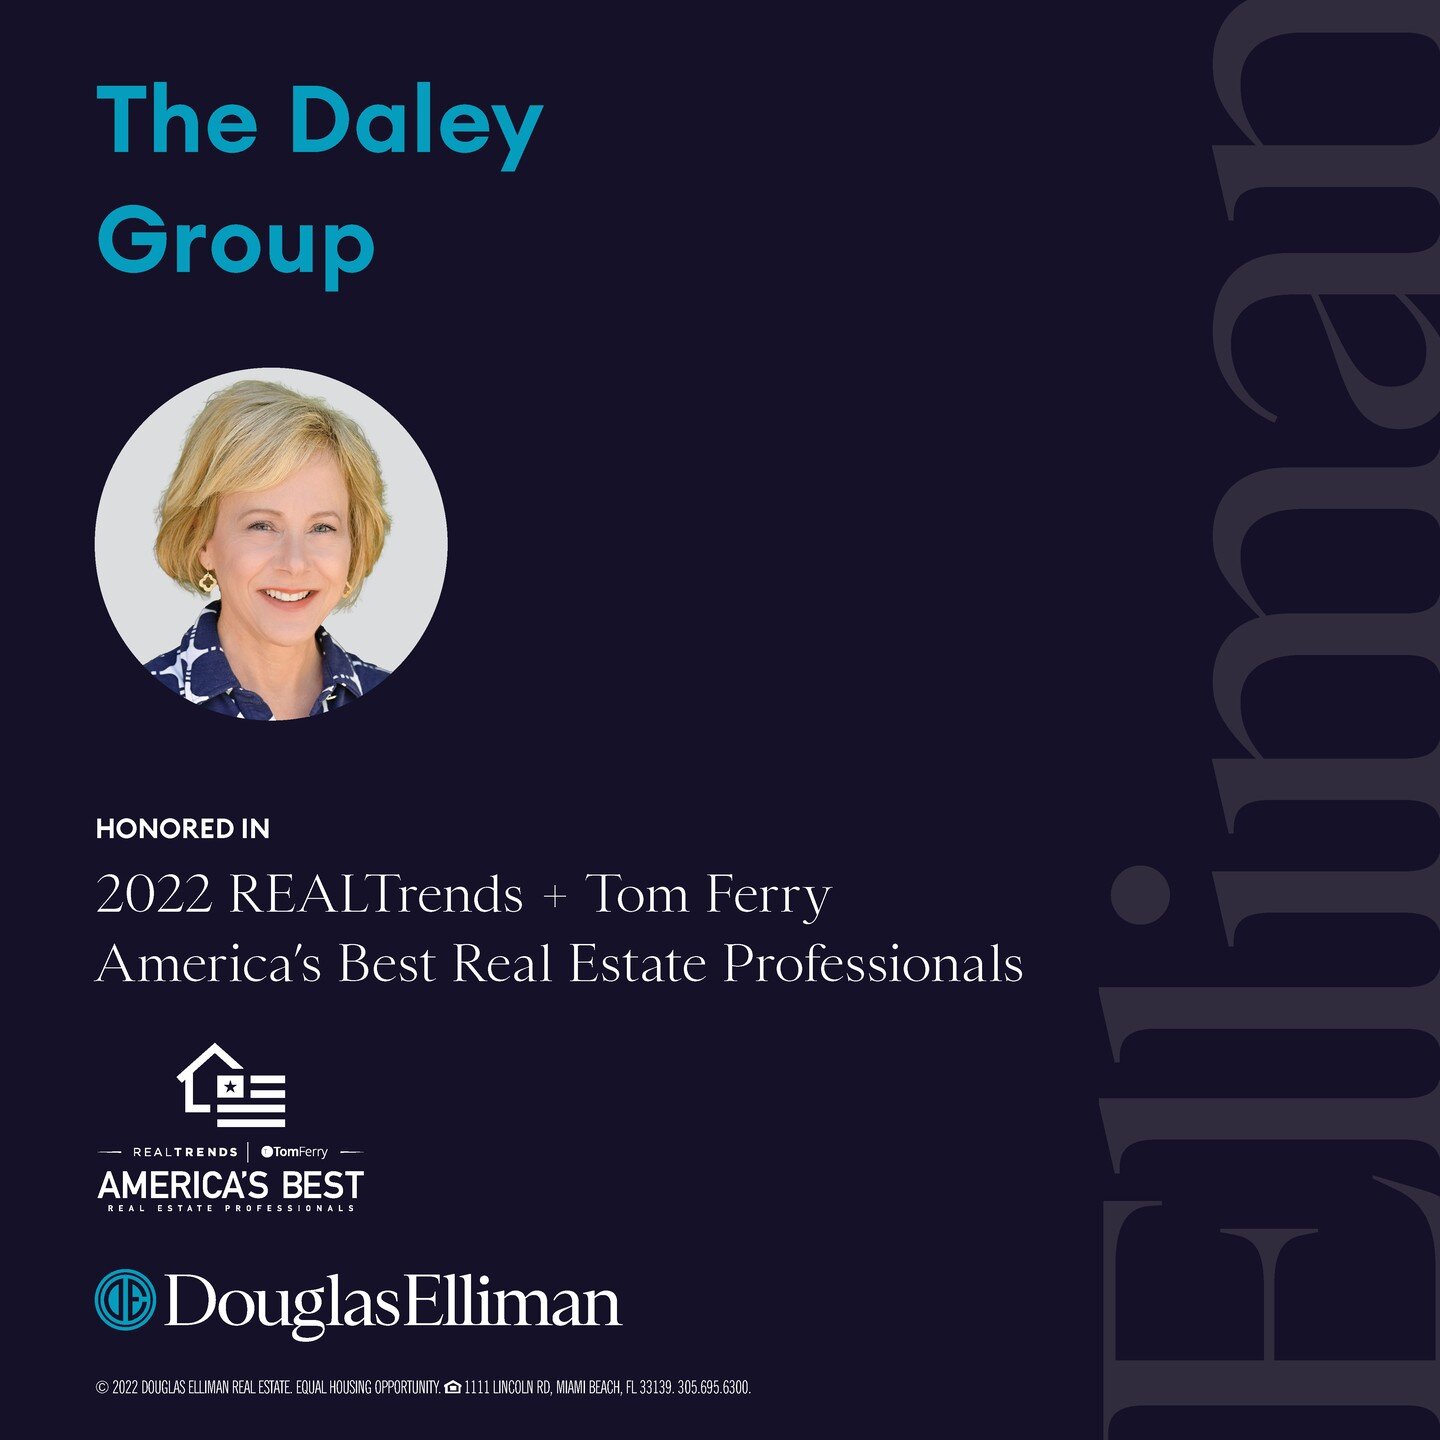 An Exceptional Honor ✨

I am thrilled to announce my inclusion in this year&rsquo;s RealTrends + Tom Ferry America&rsquo;s Best List, recognizing the top 1.5% out of more than 1.4 million licensed real estate professionals nationwide.

This accomplis